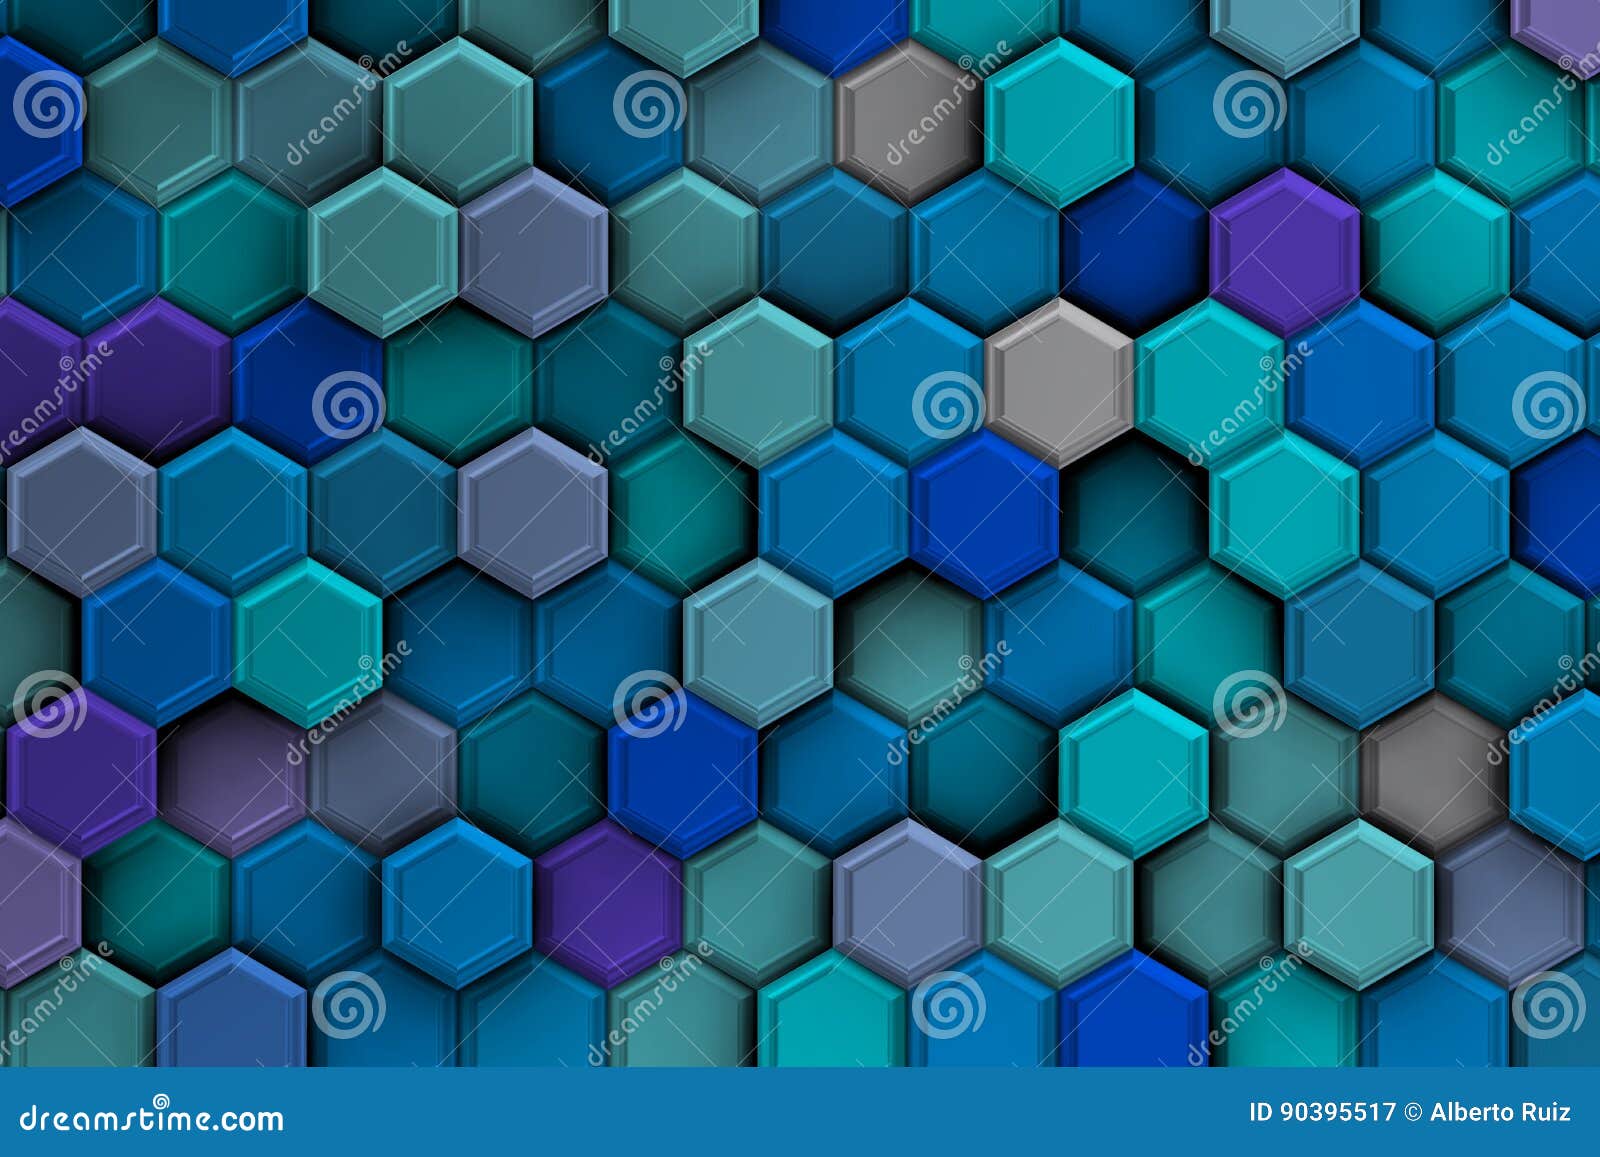 background of bluish s with relief and shadows,